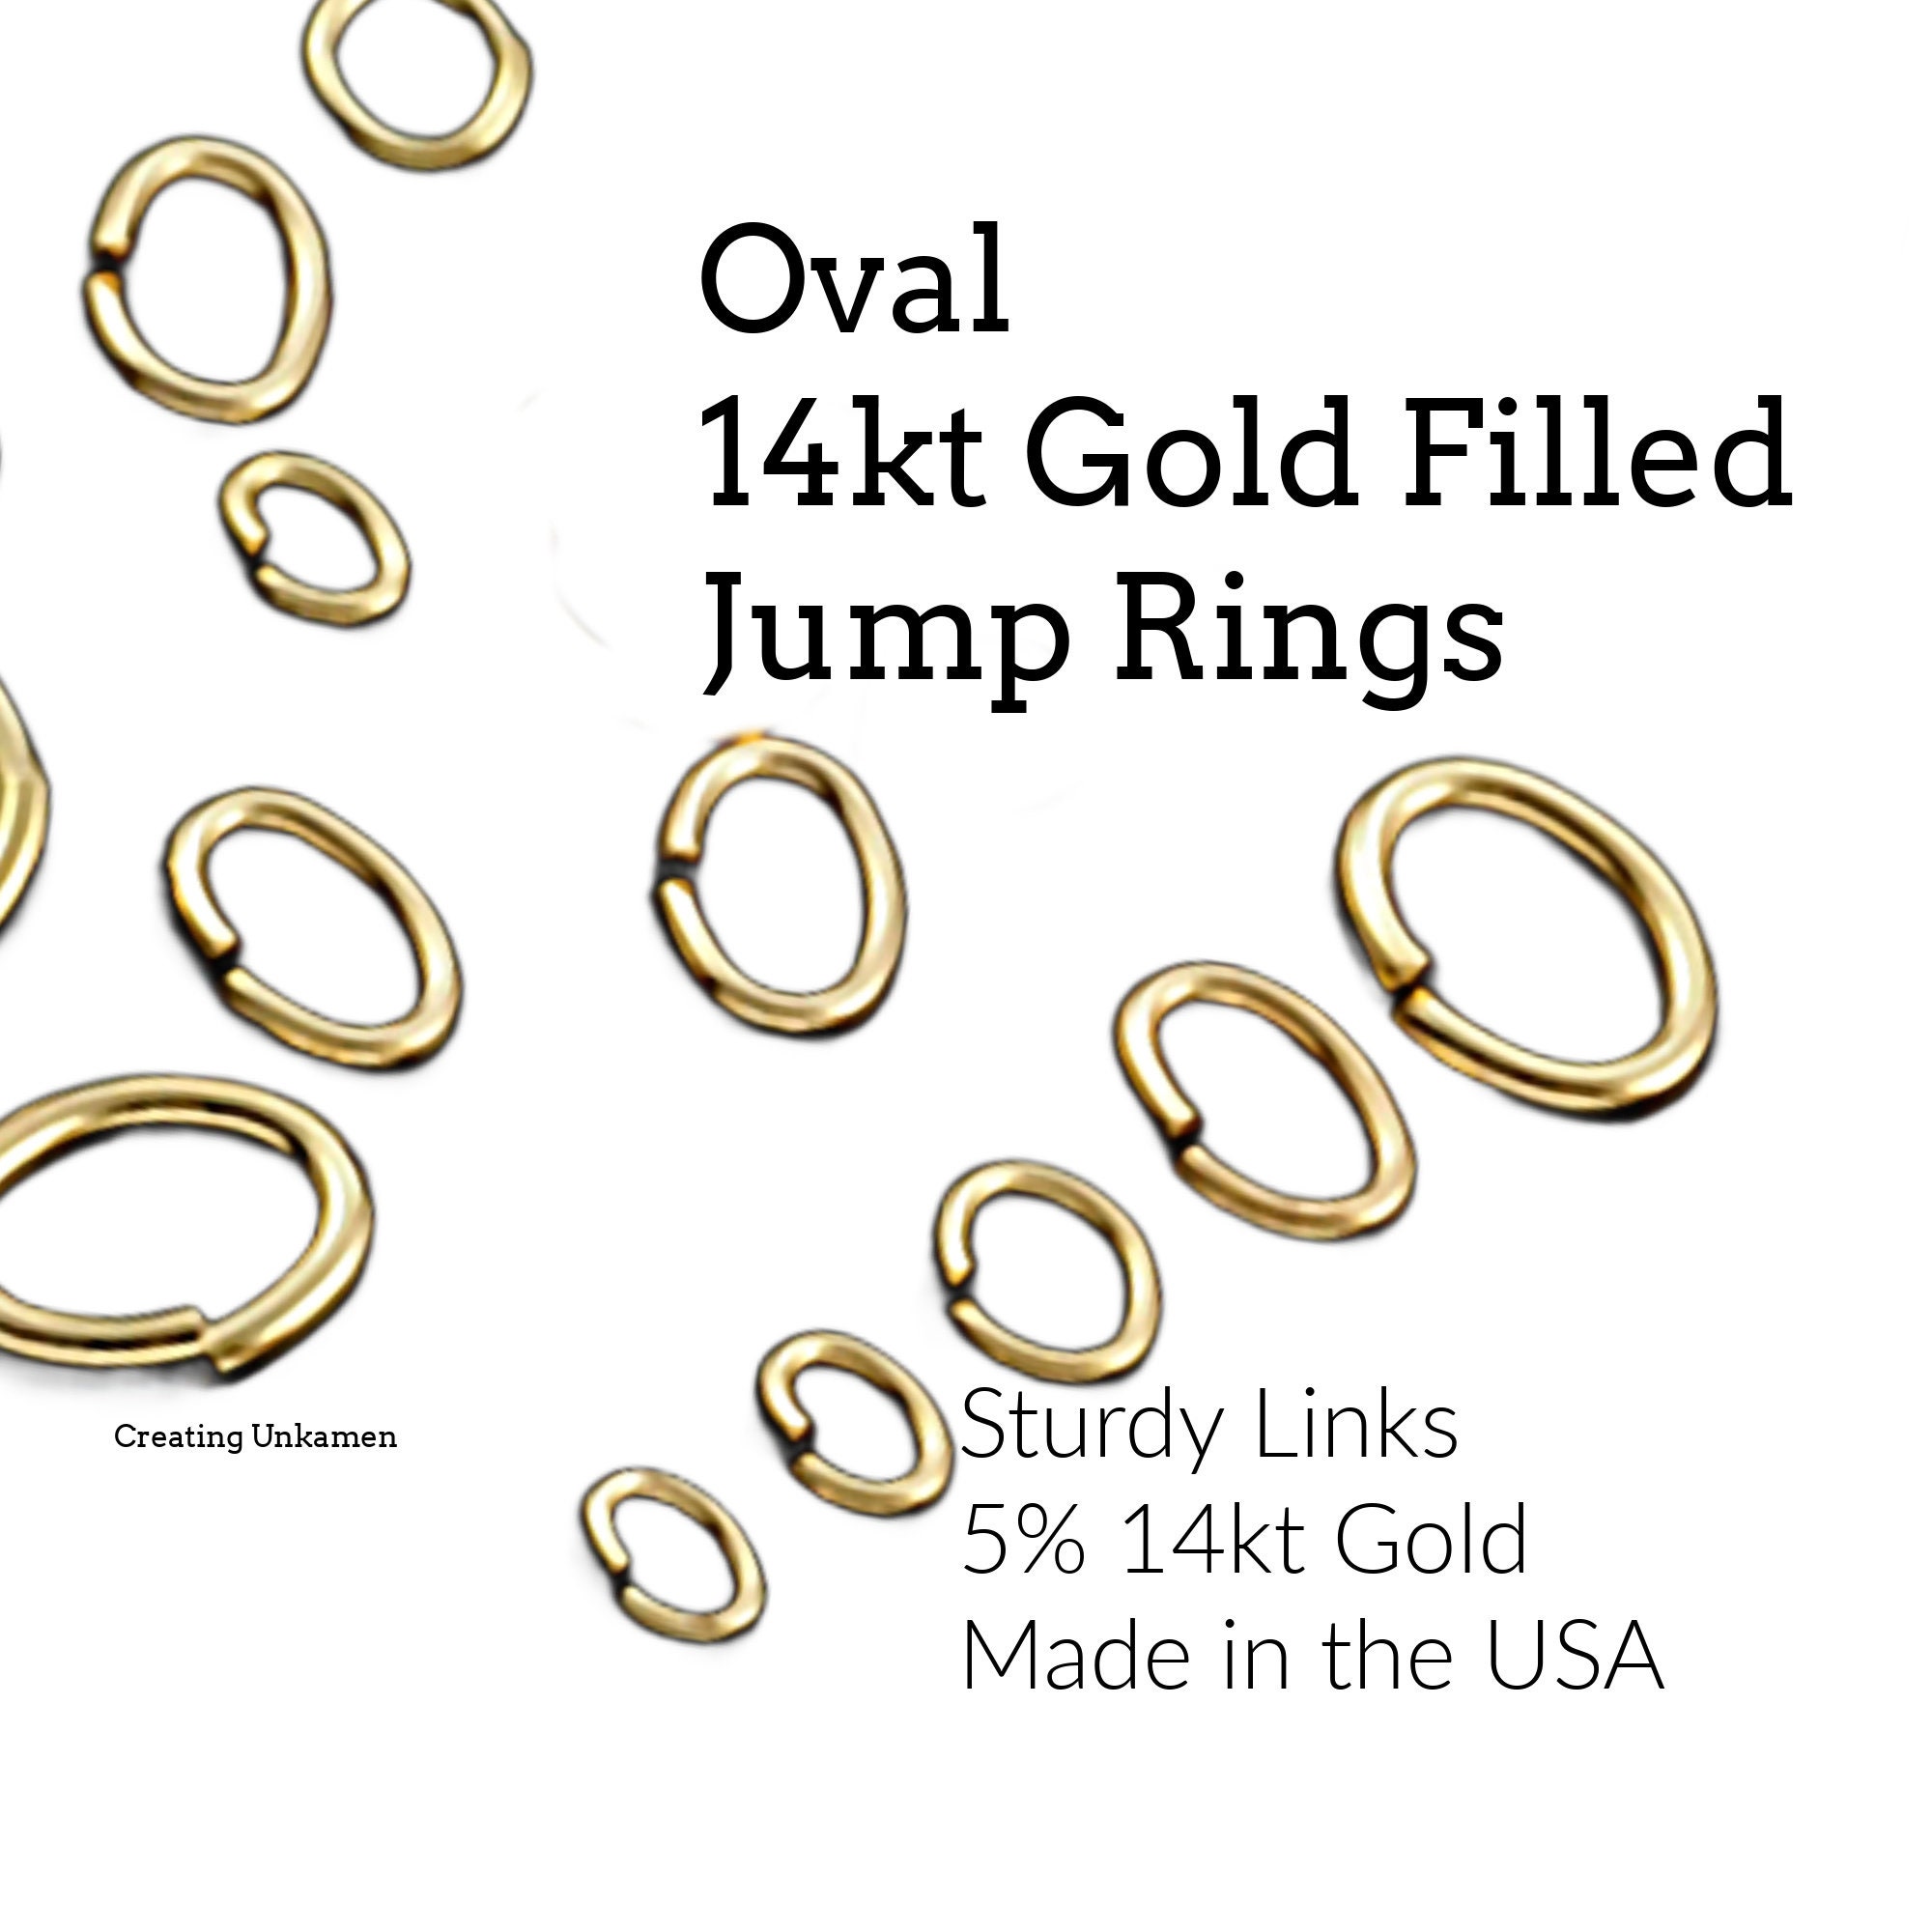 10 14kt Gold Filled Oval Jump Rings 7 Sizes in 16, 18, 20 and 22 Gauge to  Choose From 